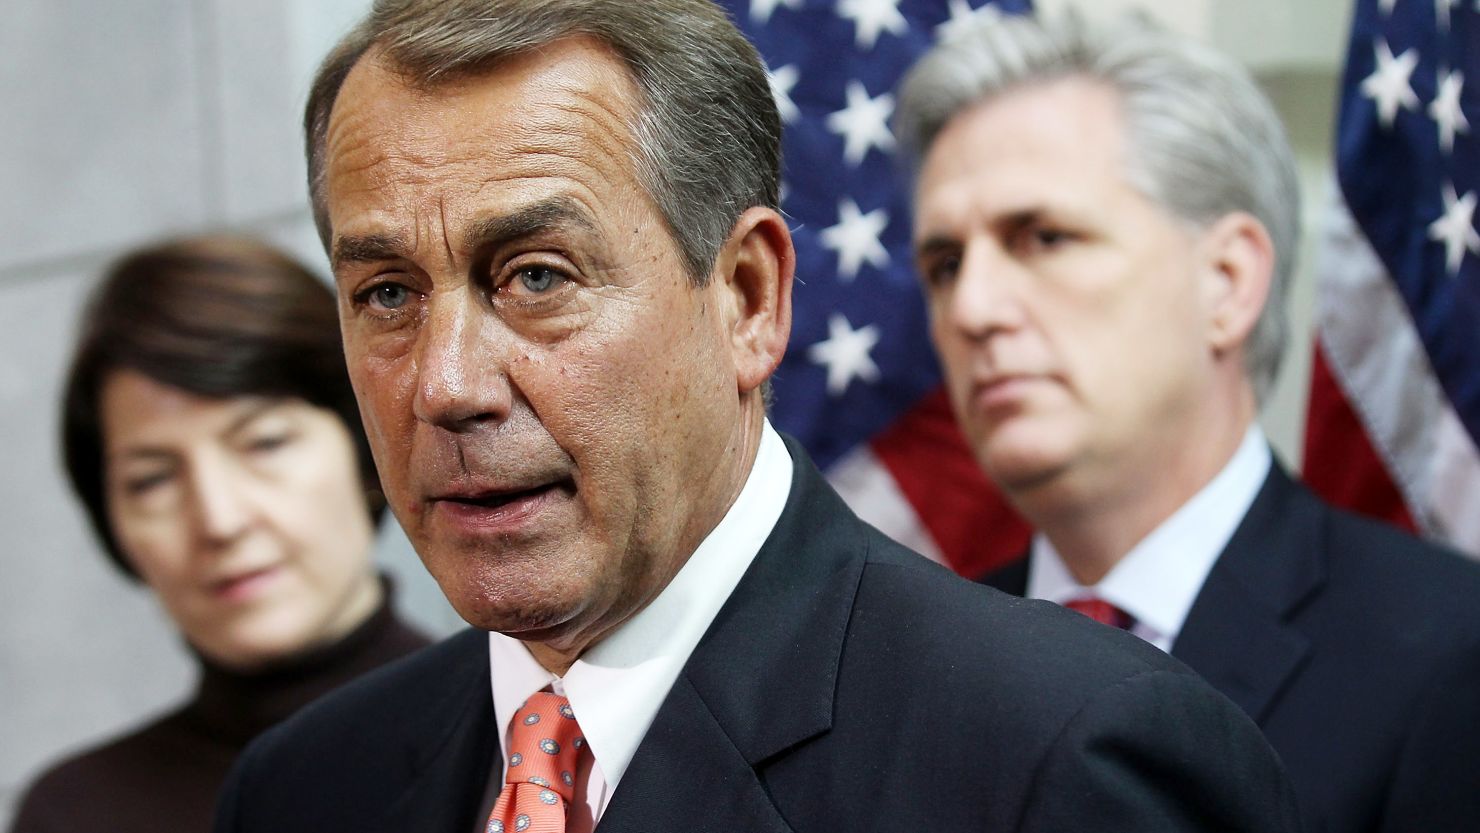 House Speaker John Boehner apparently reversed his position on the extension after caucus opposition, a GOP source says.